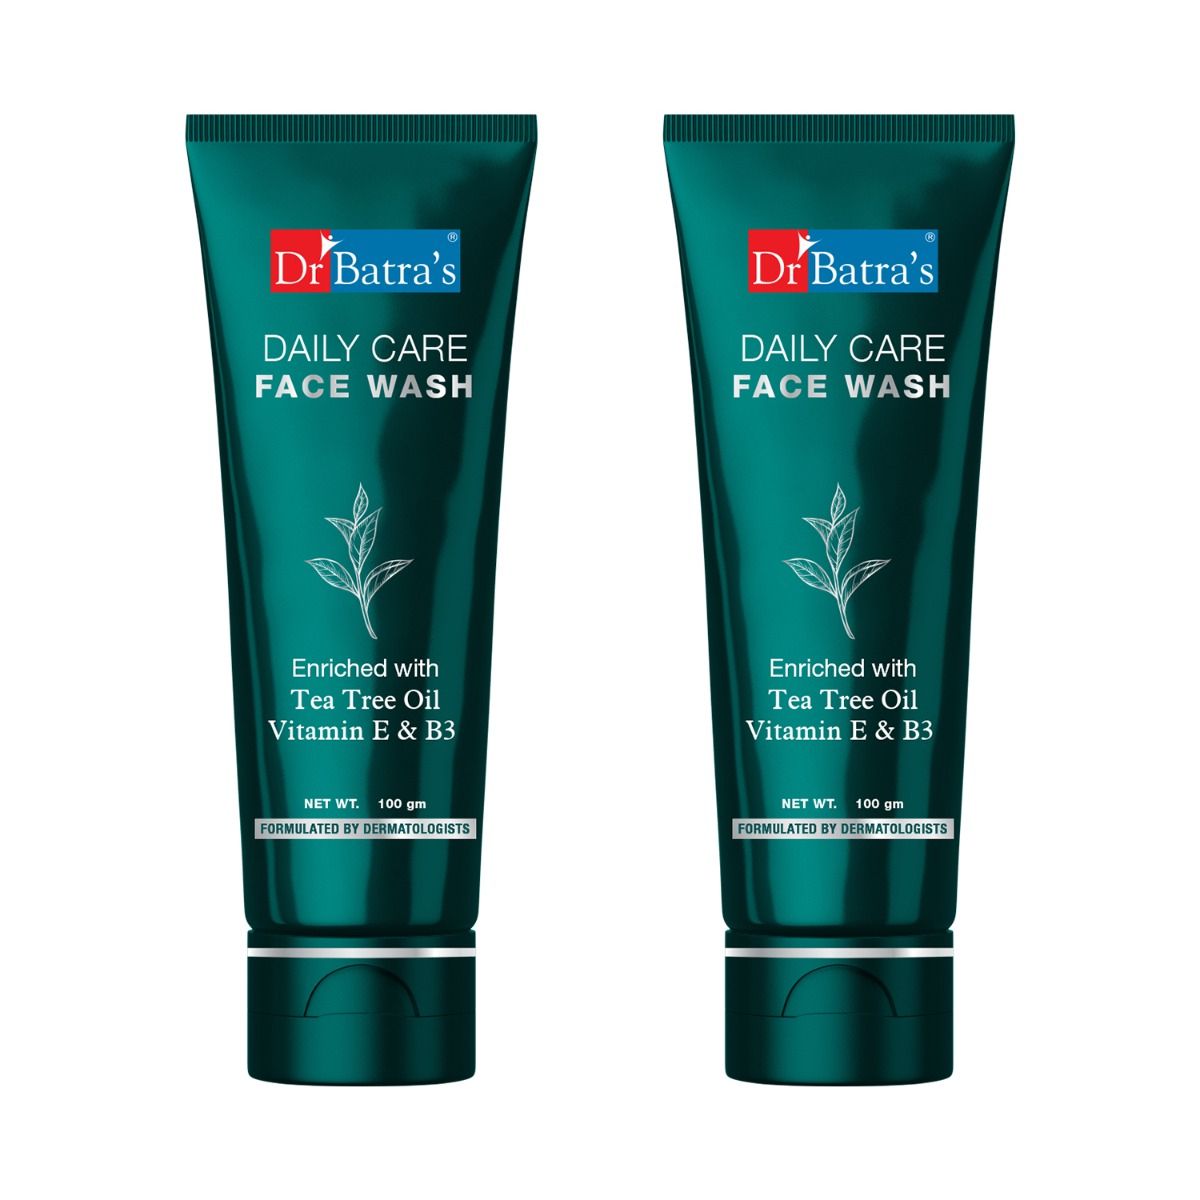     			Dr. Batra's Face Wash, Enriched with Tea Tree Oil, Vitamin E & B3, Protection from Sun Damage, Moisturized Skin (100g, Pack of 2)